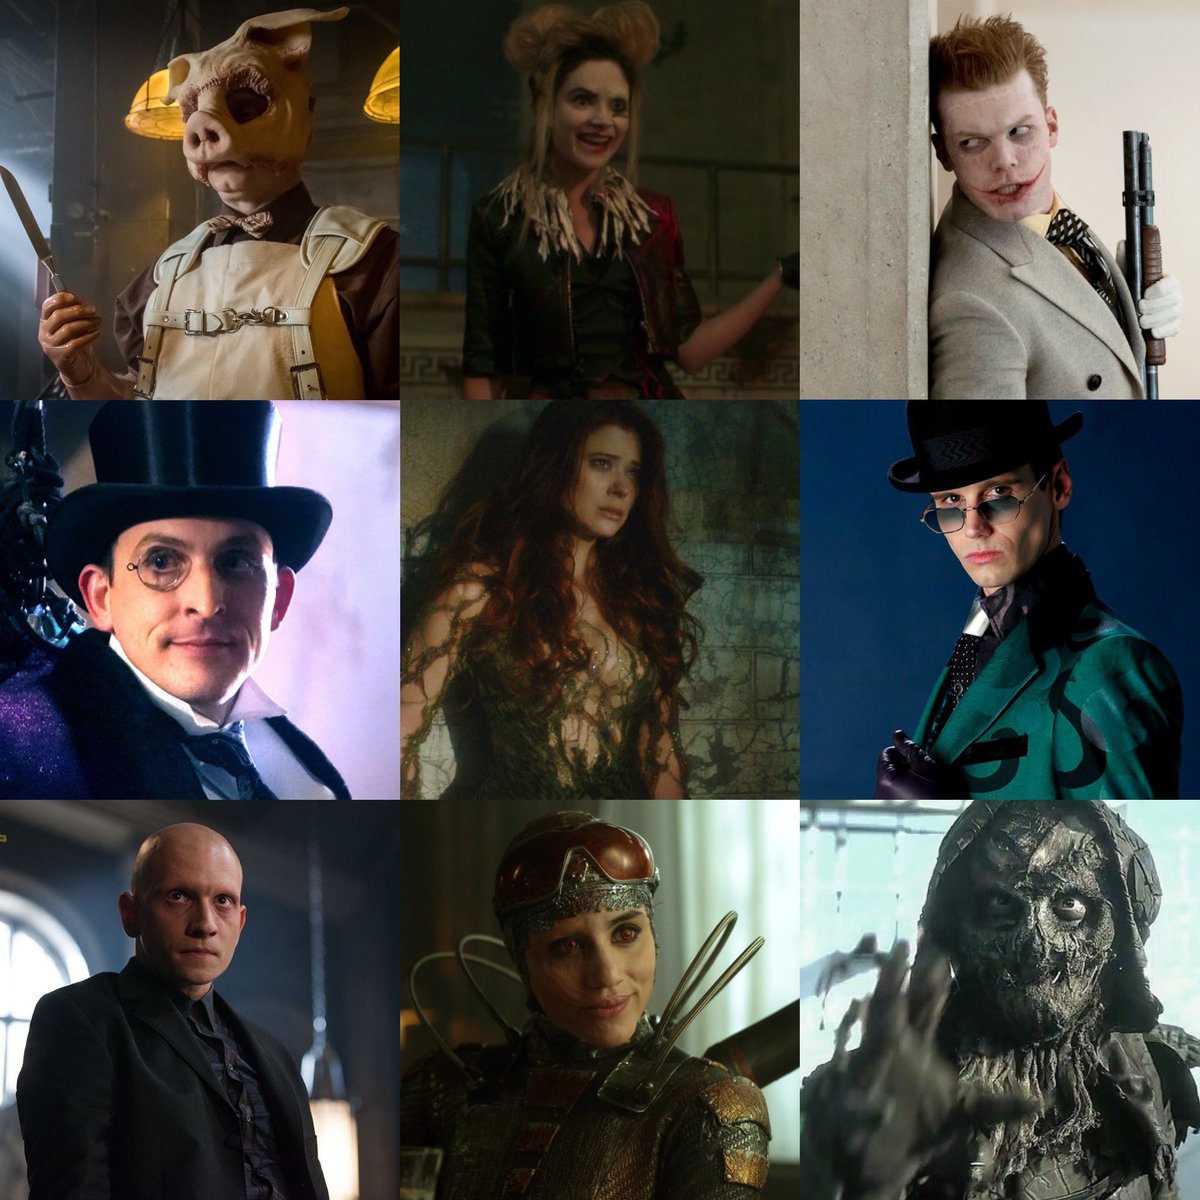 Gotham nailed it with these villain designs.